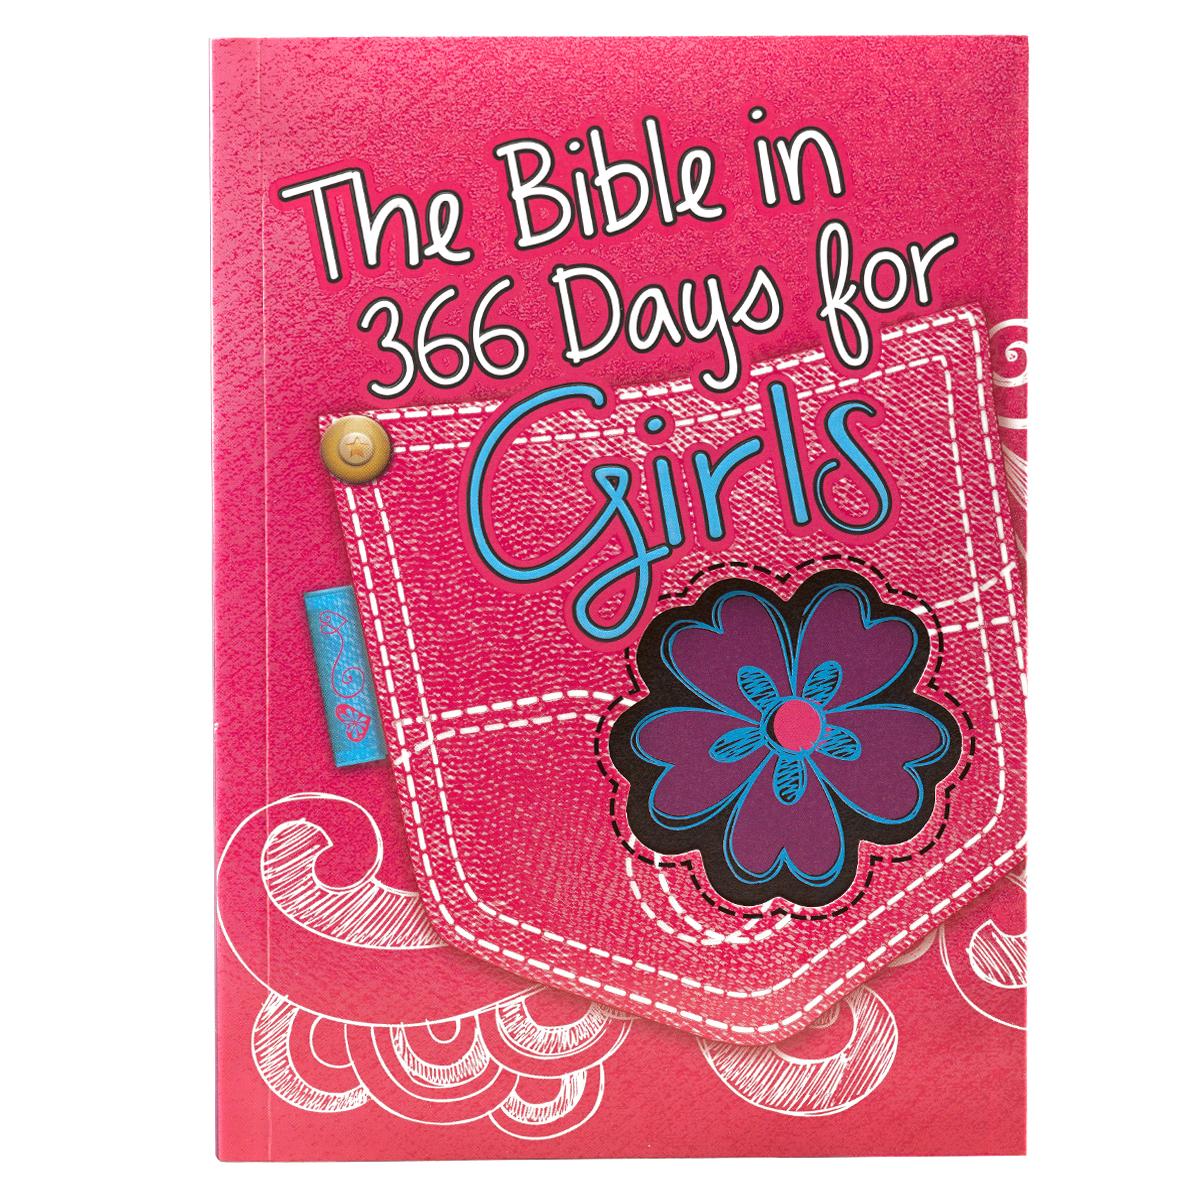 Image of The Bible in 366 Days for Girls other